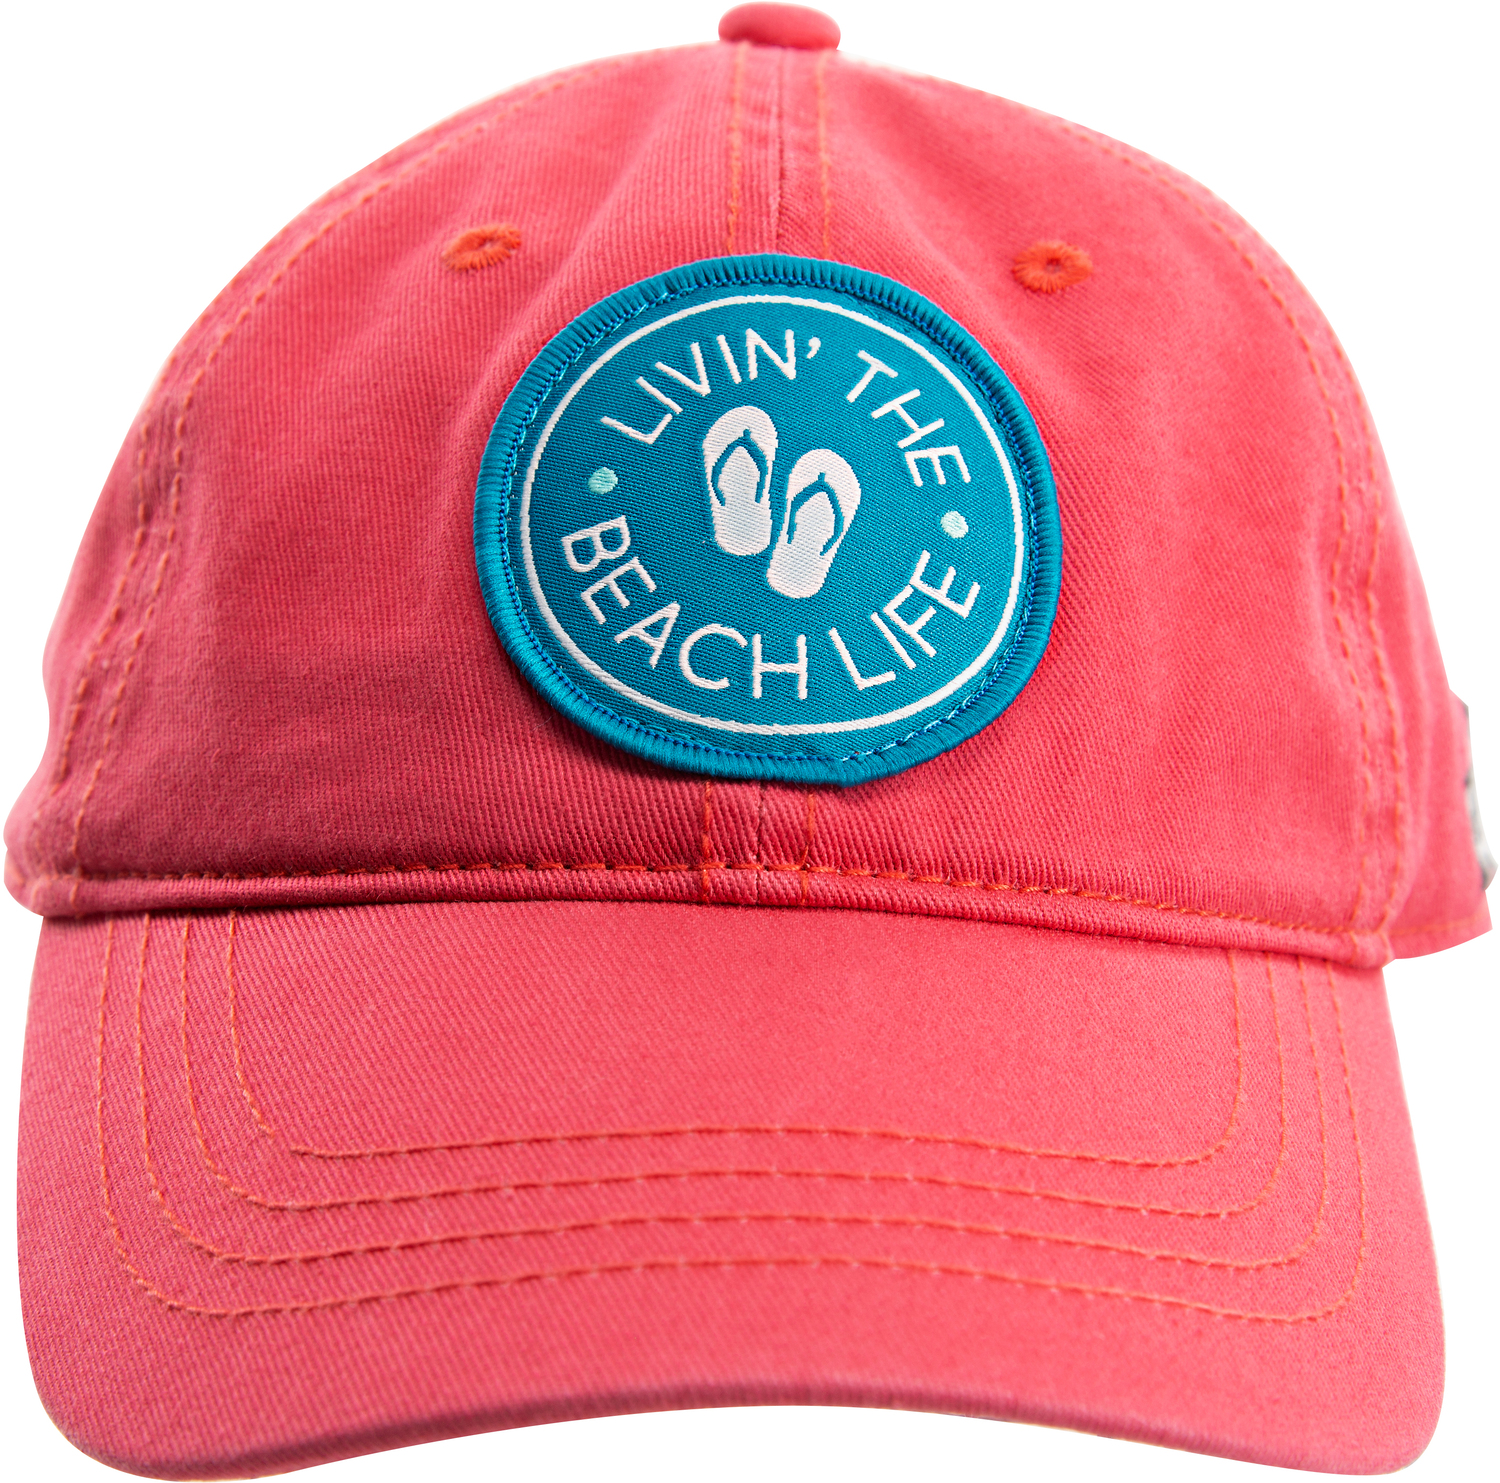 Beach Life by We People - Beach Life - Coral Adjustable Hat